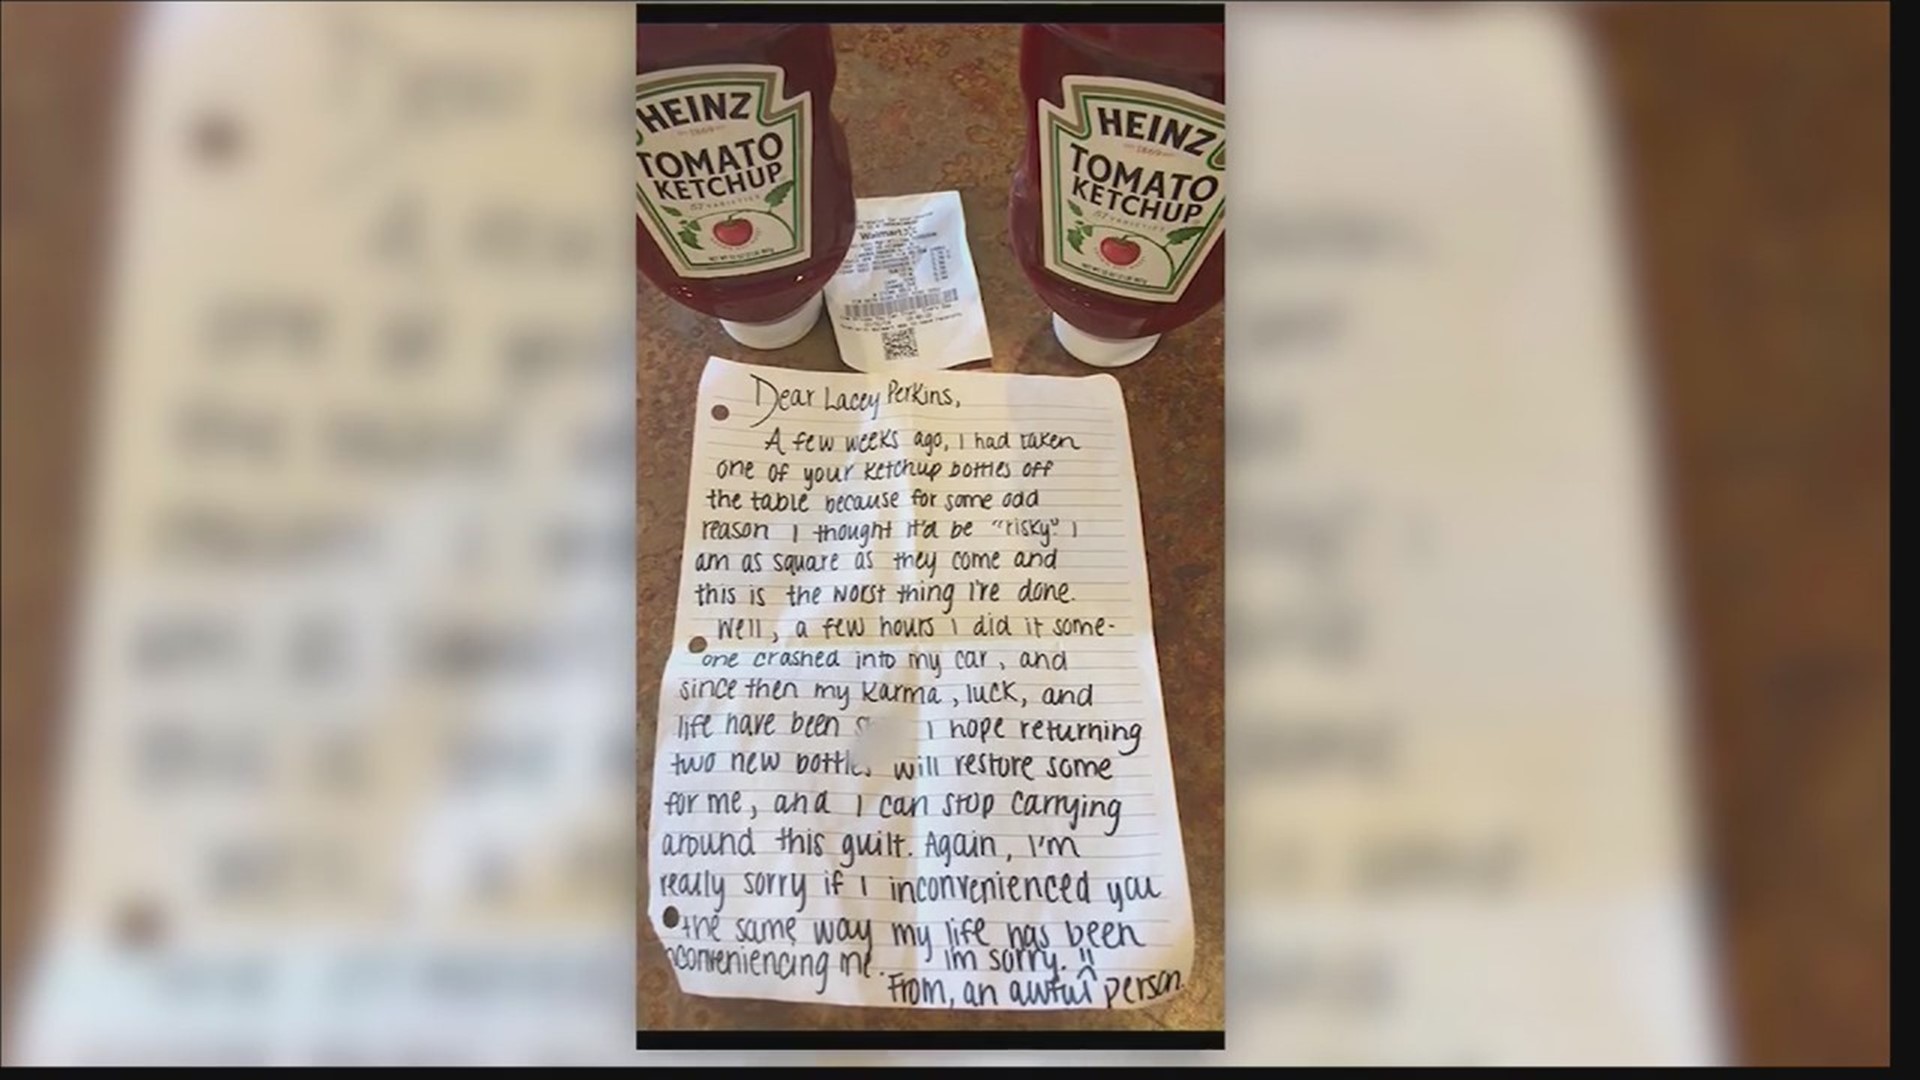 A ketchup thief's apology note is going viral. Yes, ketchup...you can call it "ketchup karma."